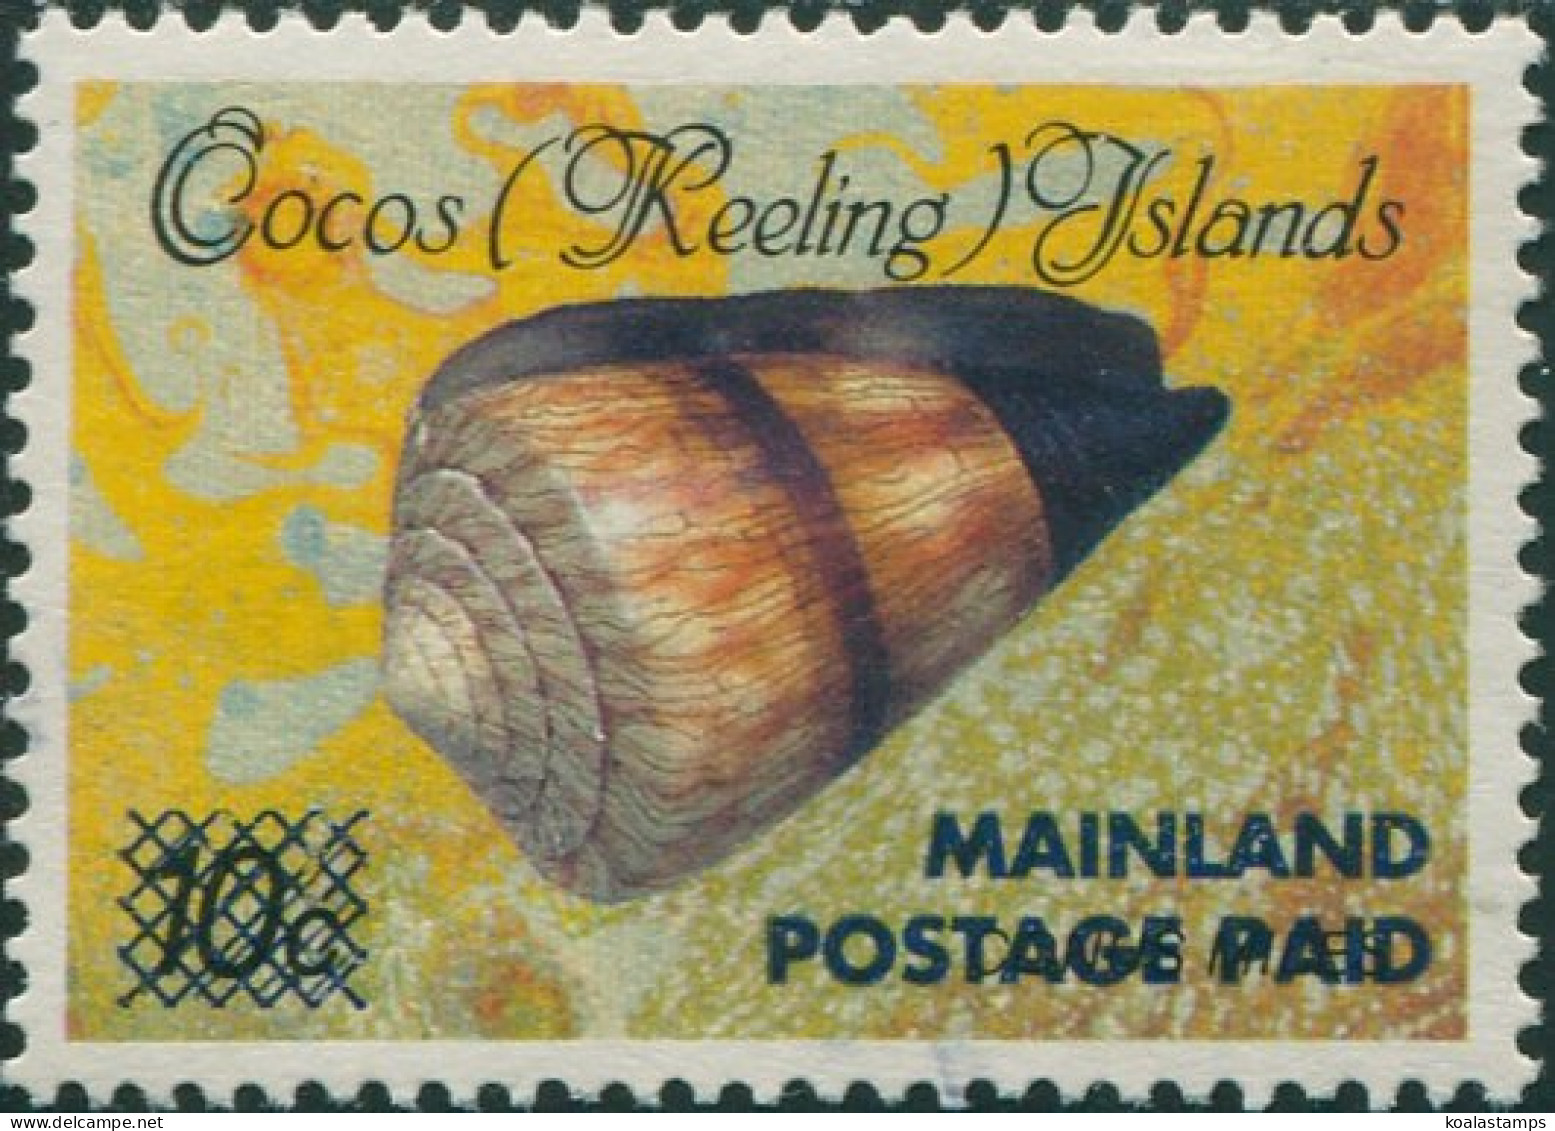 Cocos Islands 1990 SG235 POSTAGE PAID Cone Shell MNH - Isole Cocos (Keeling)